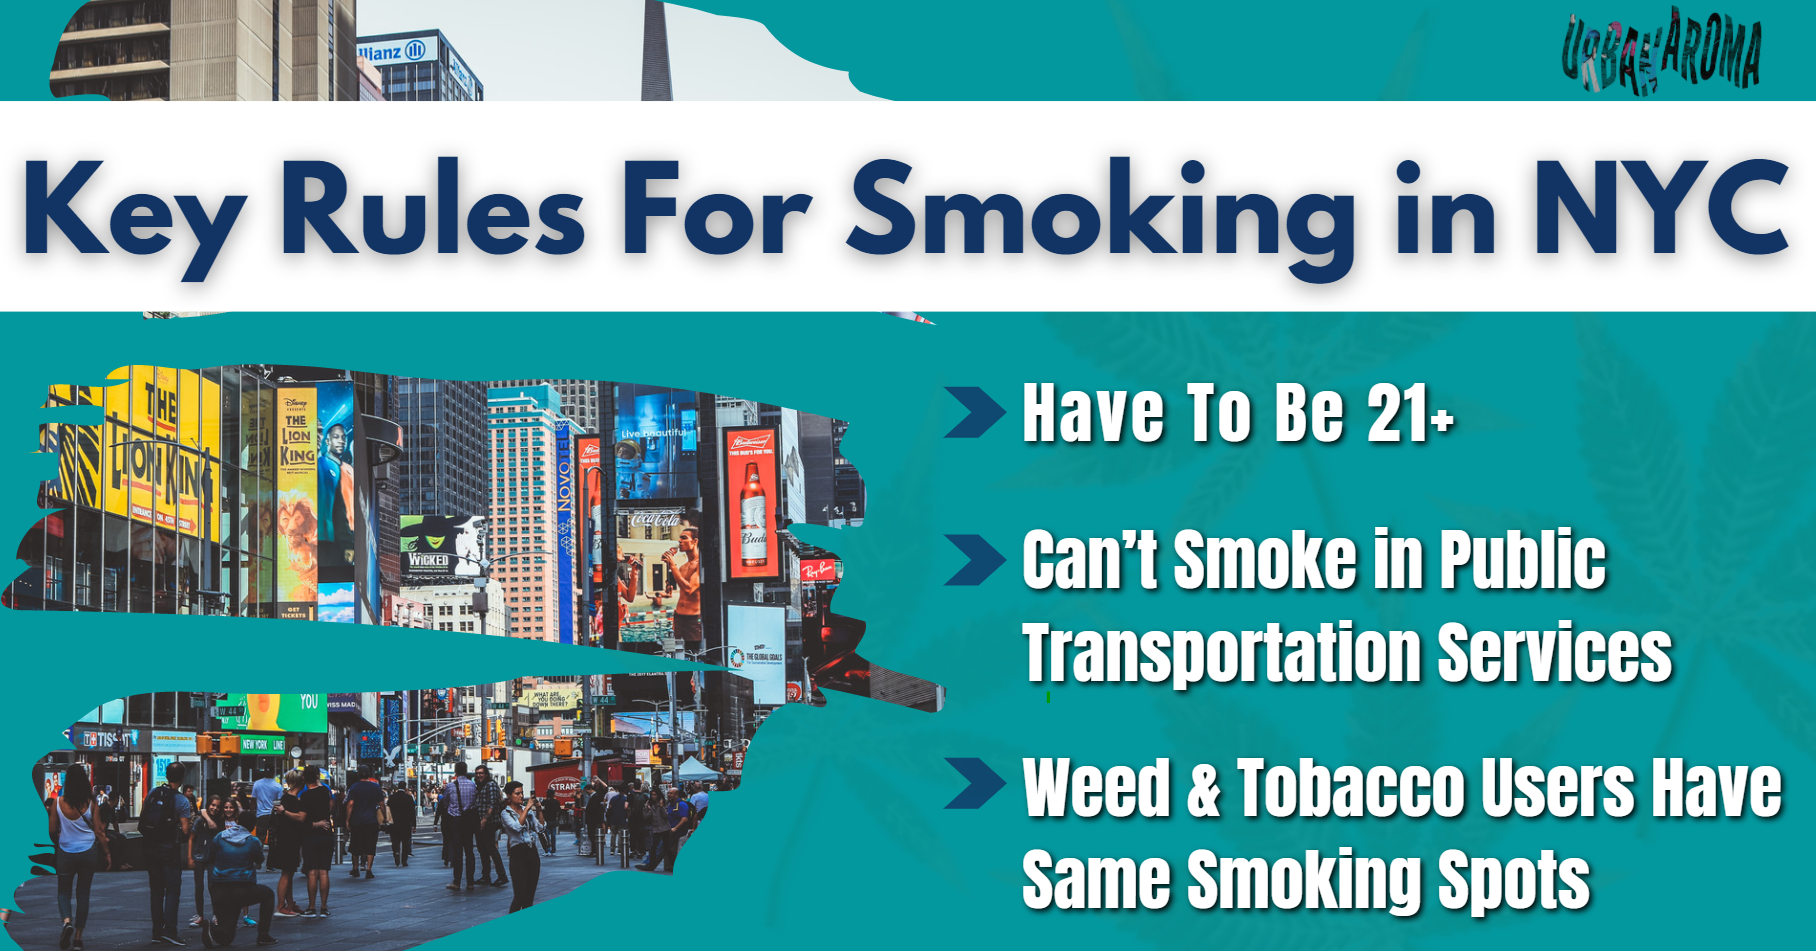 Key rules for smoking in NYC